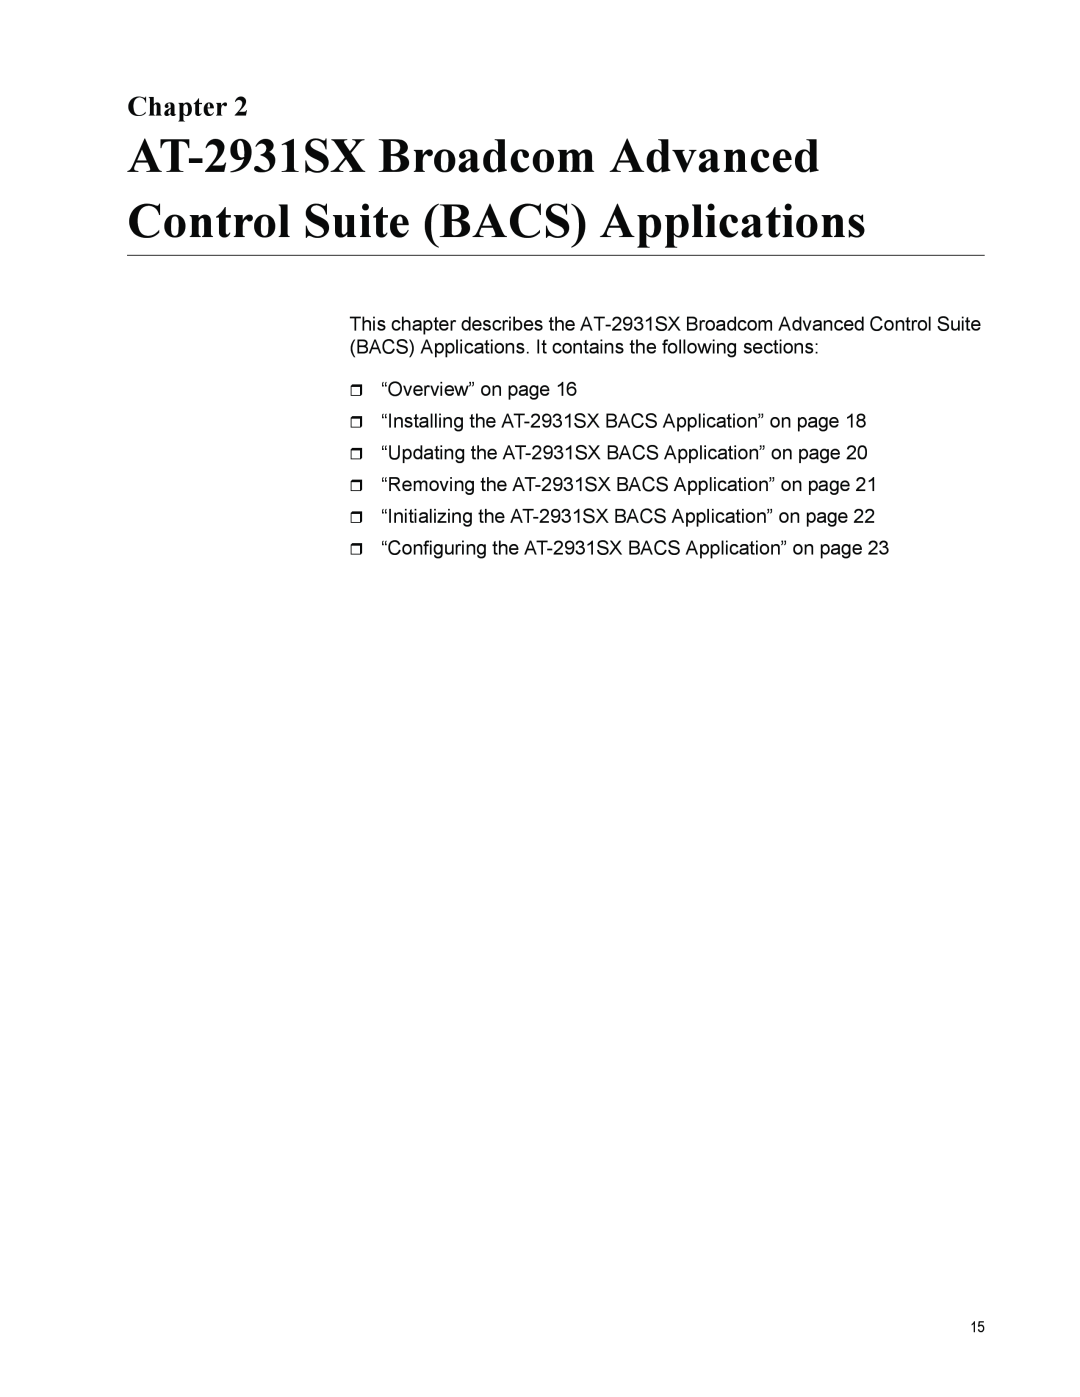 Allied Telesis manual AT-2931SX Broadcom Advanced Control Suite BACS Applications, Chapter 